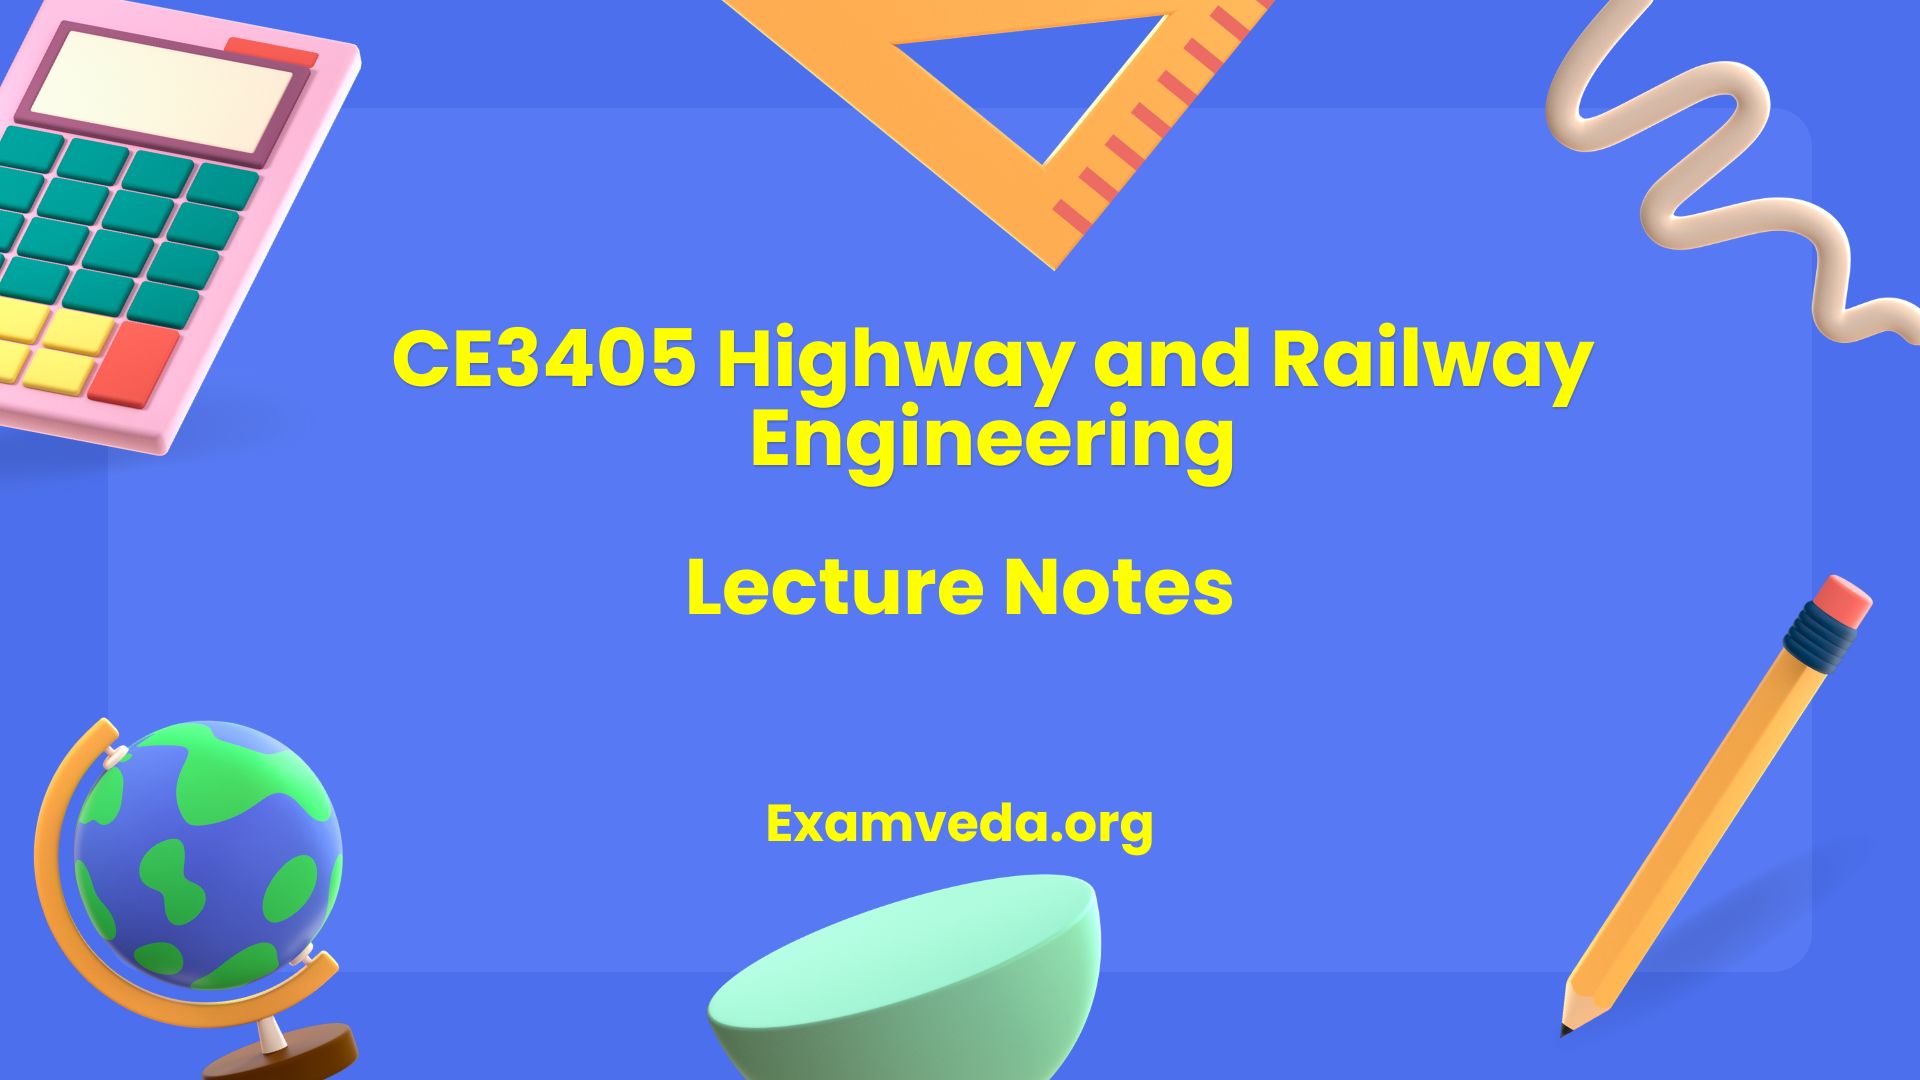 CE3405 Highway and Railway Engineering Lecture Notes